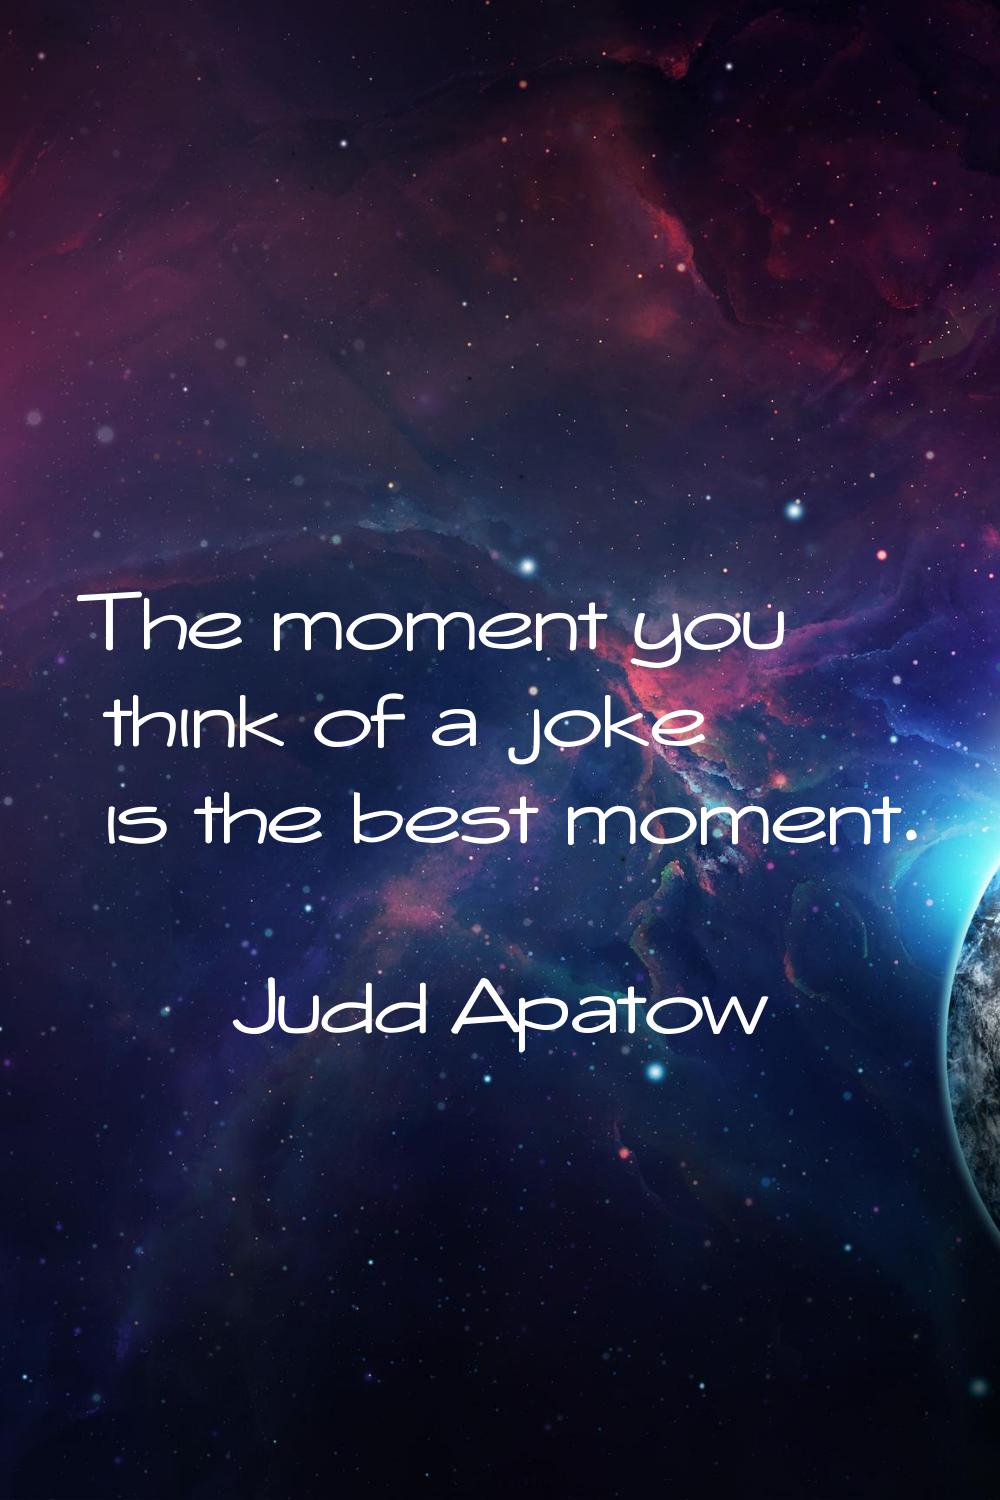 The moment you think of a joke is the best moment.